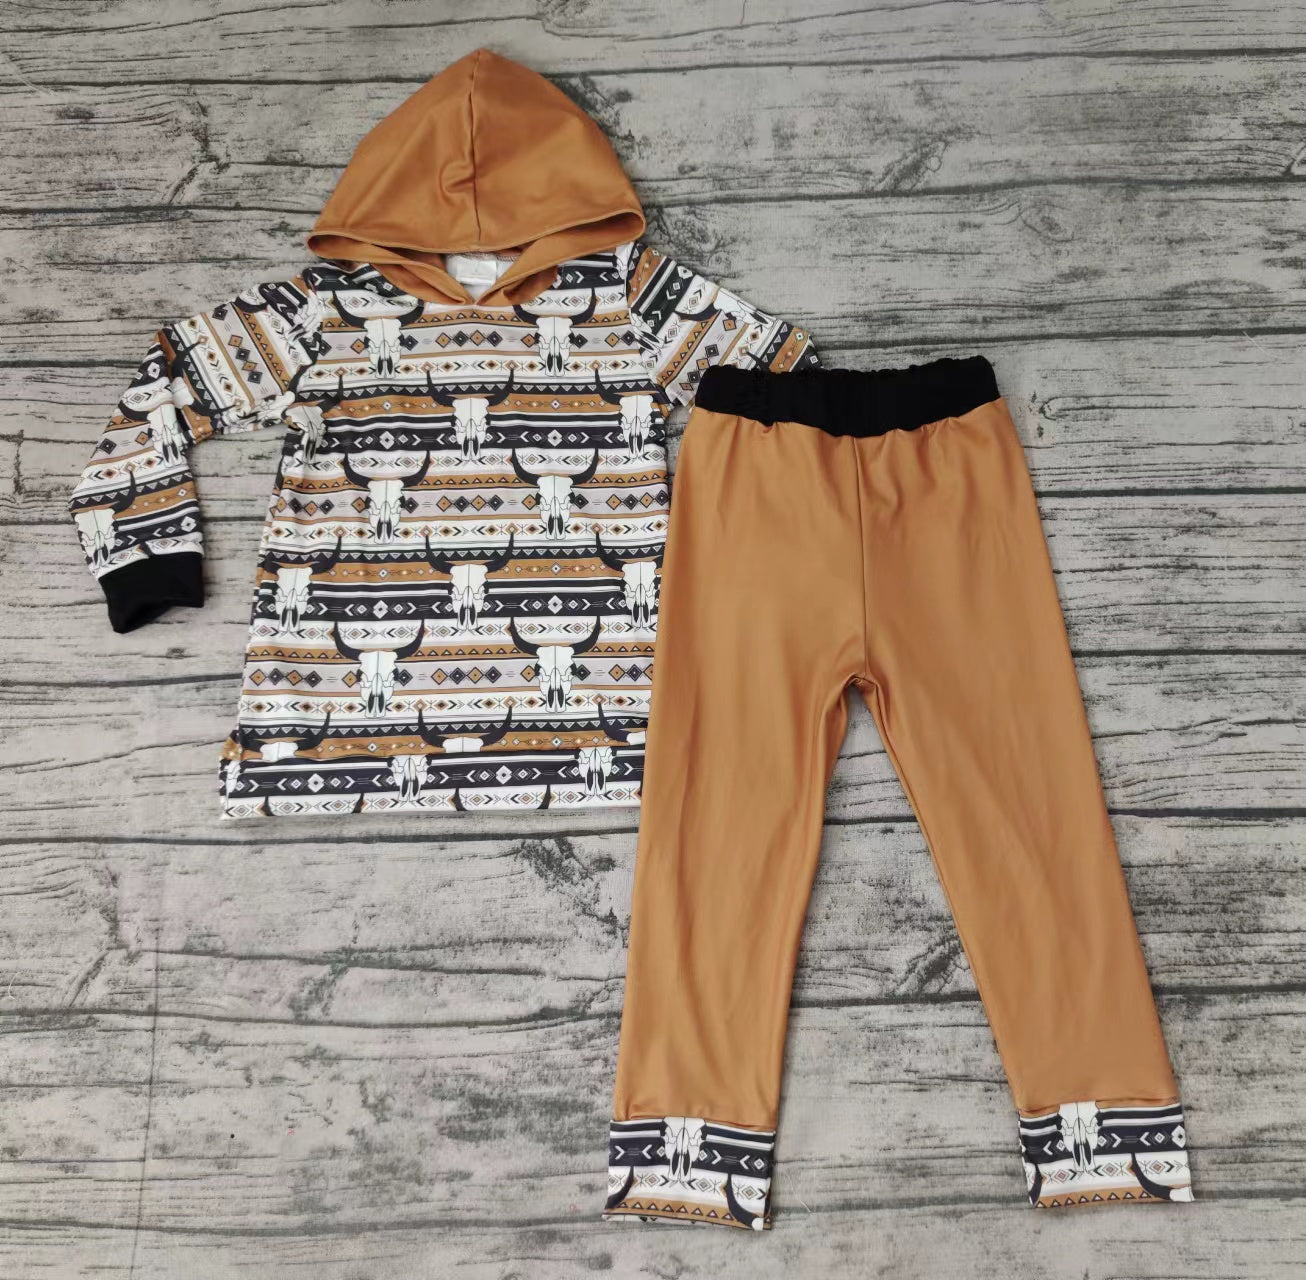 Halloween baby boys aztec hooded fall clothes